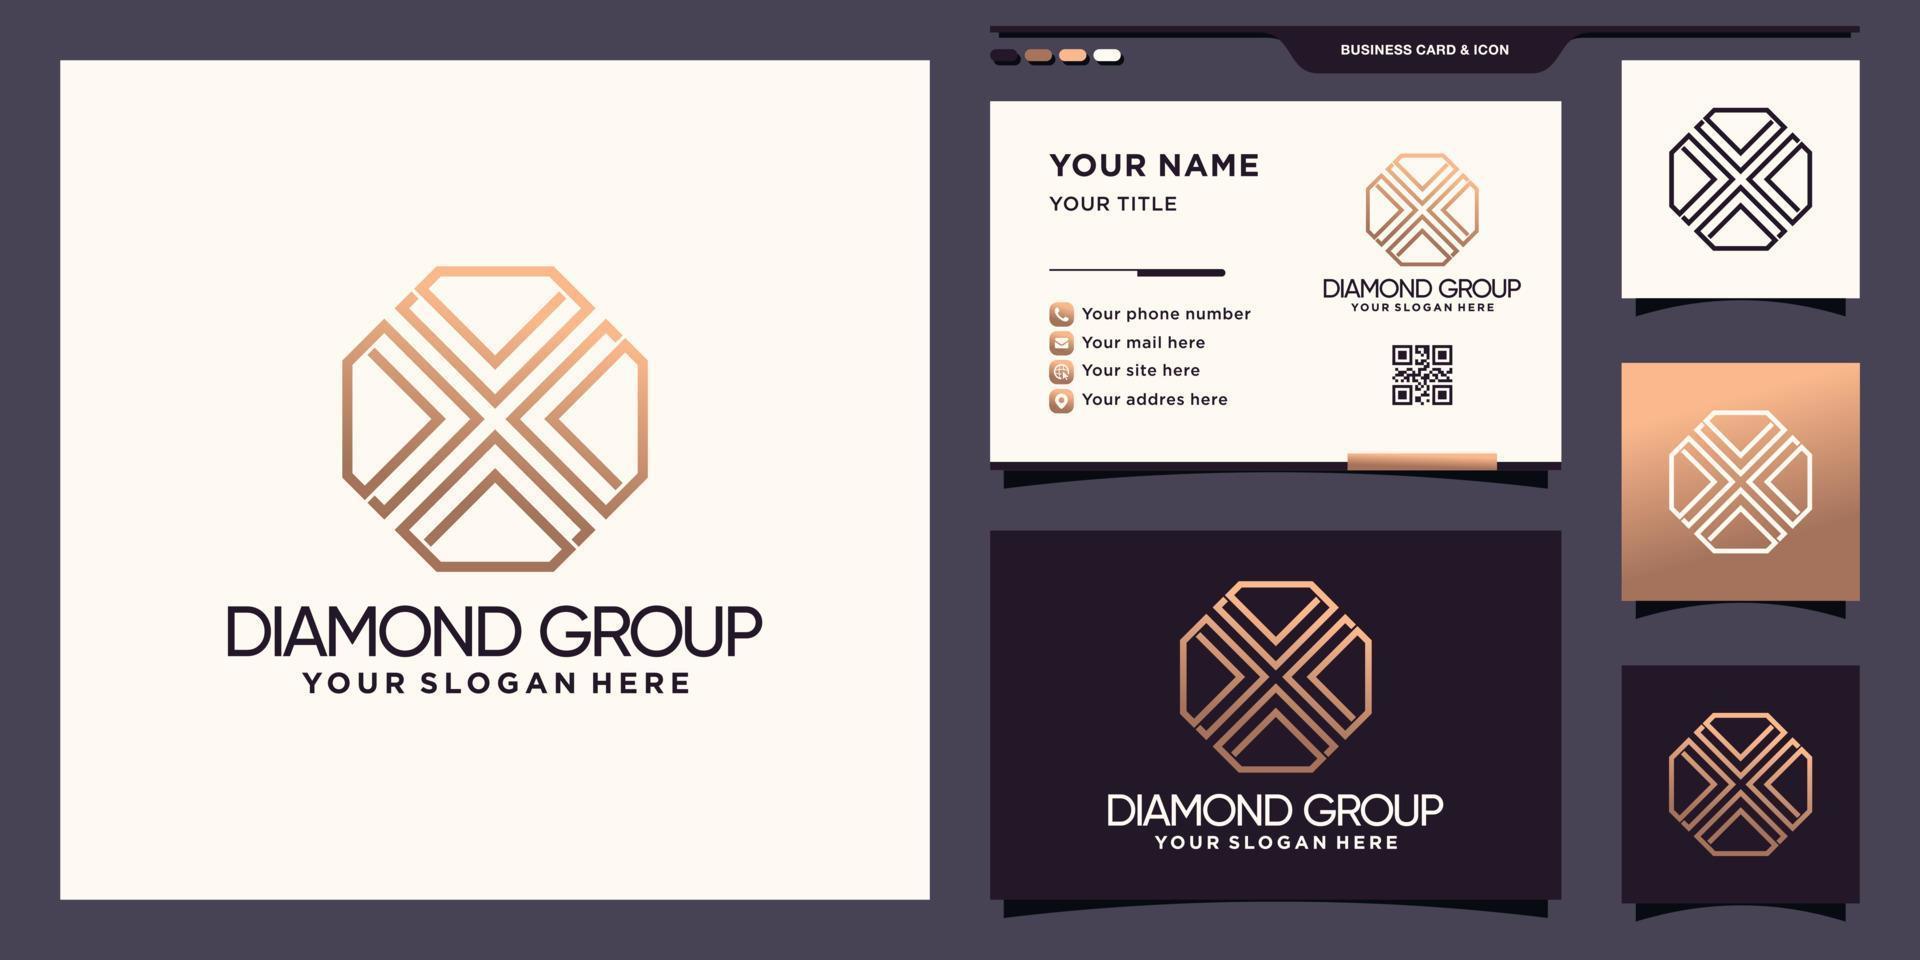 Creative diamond group logo with line art style and business card design Premium vector